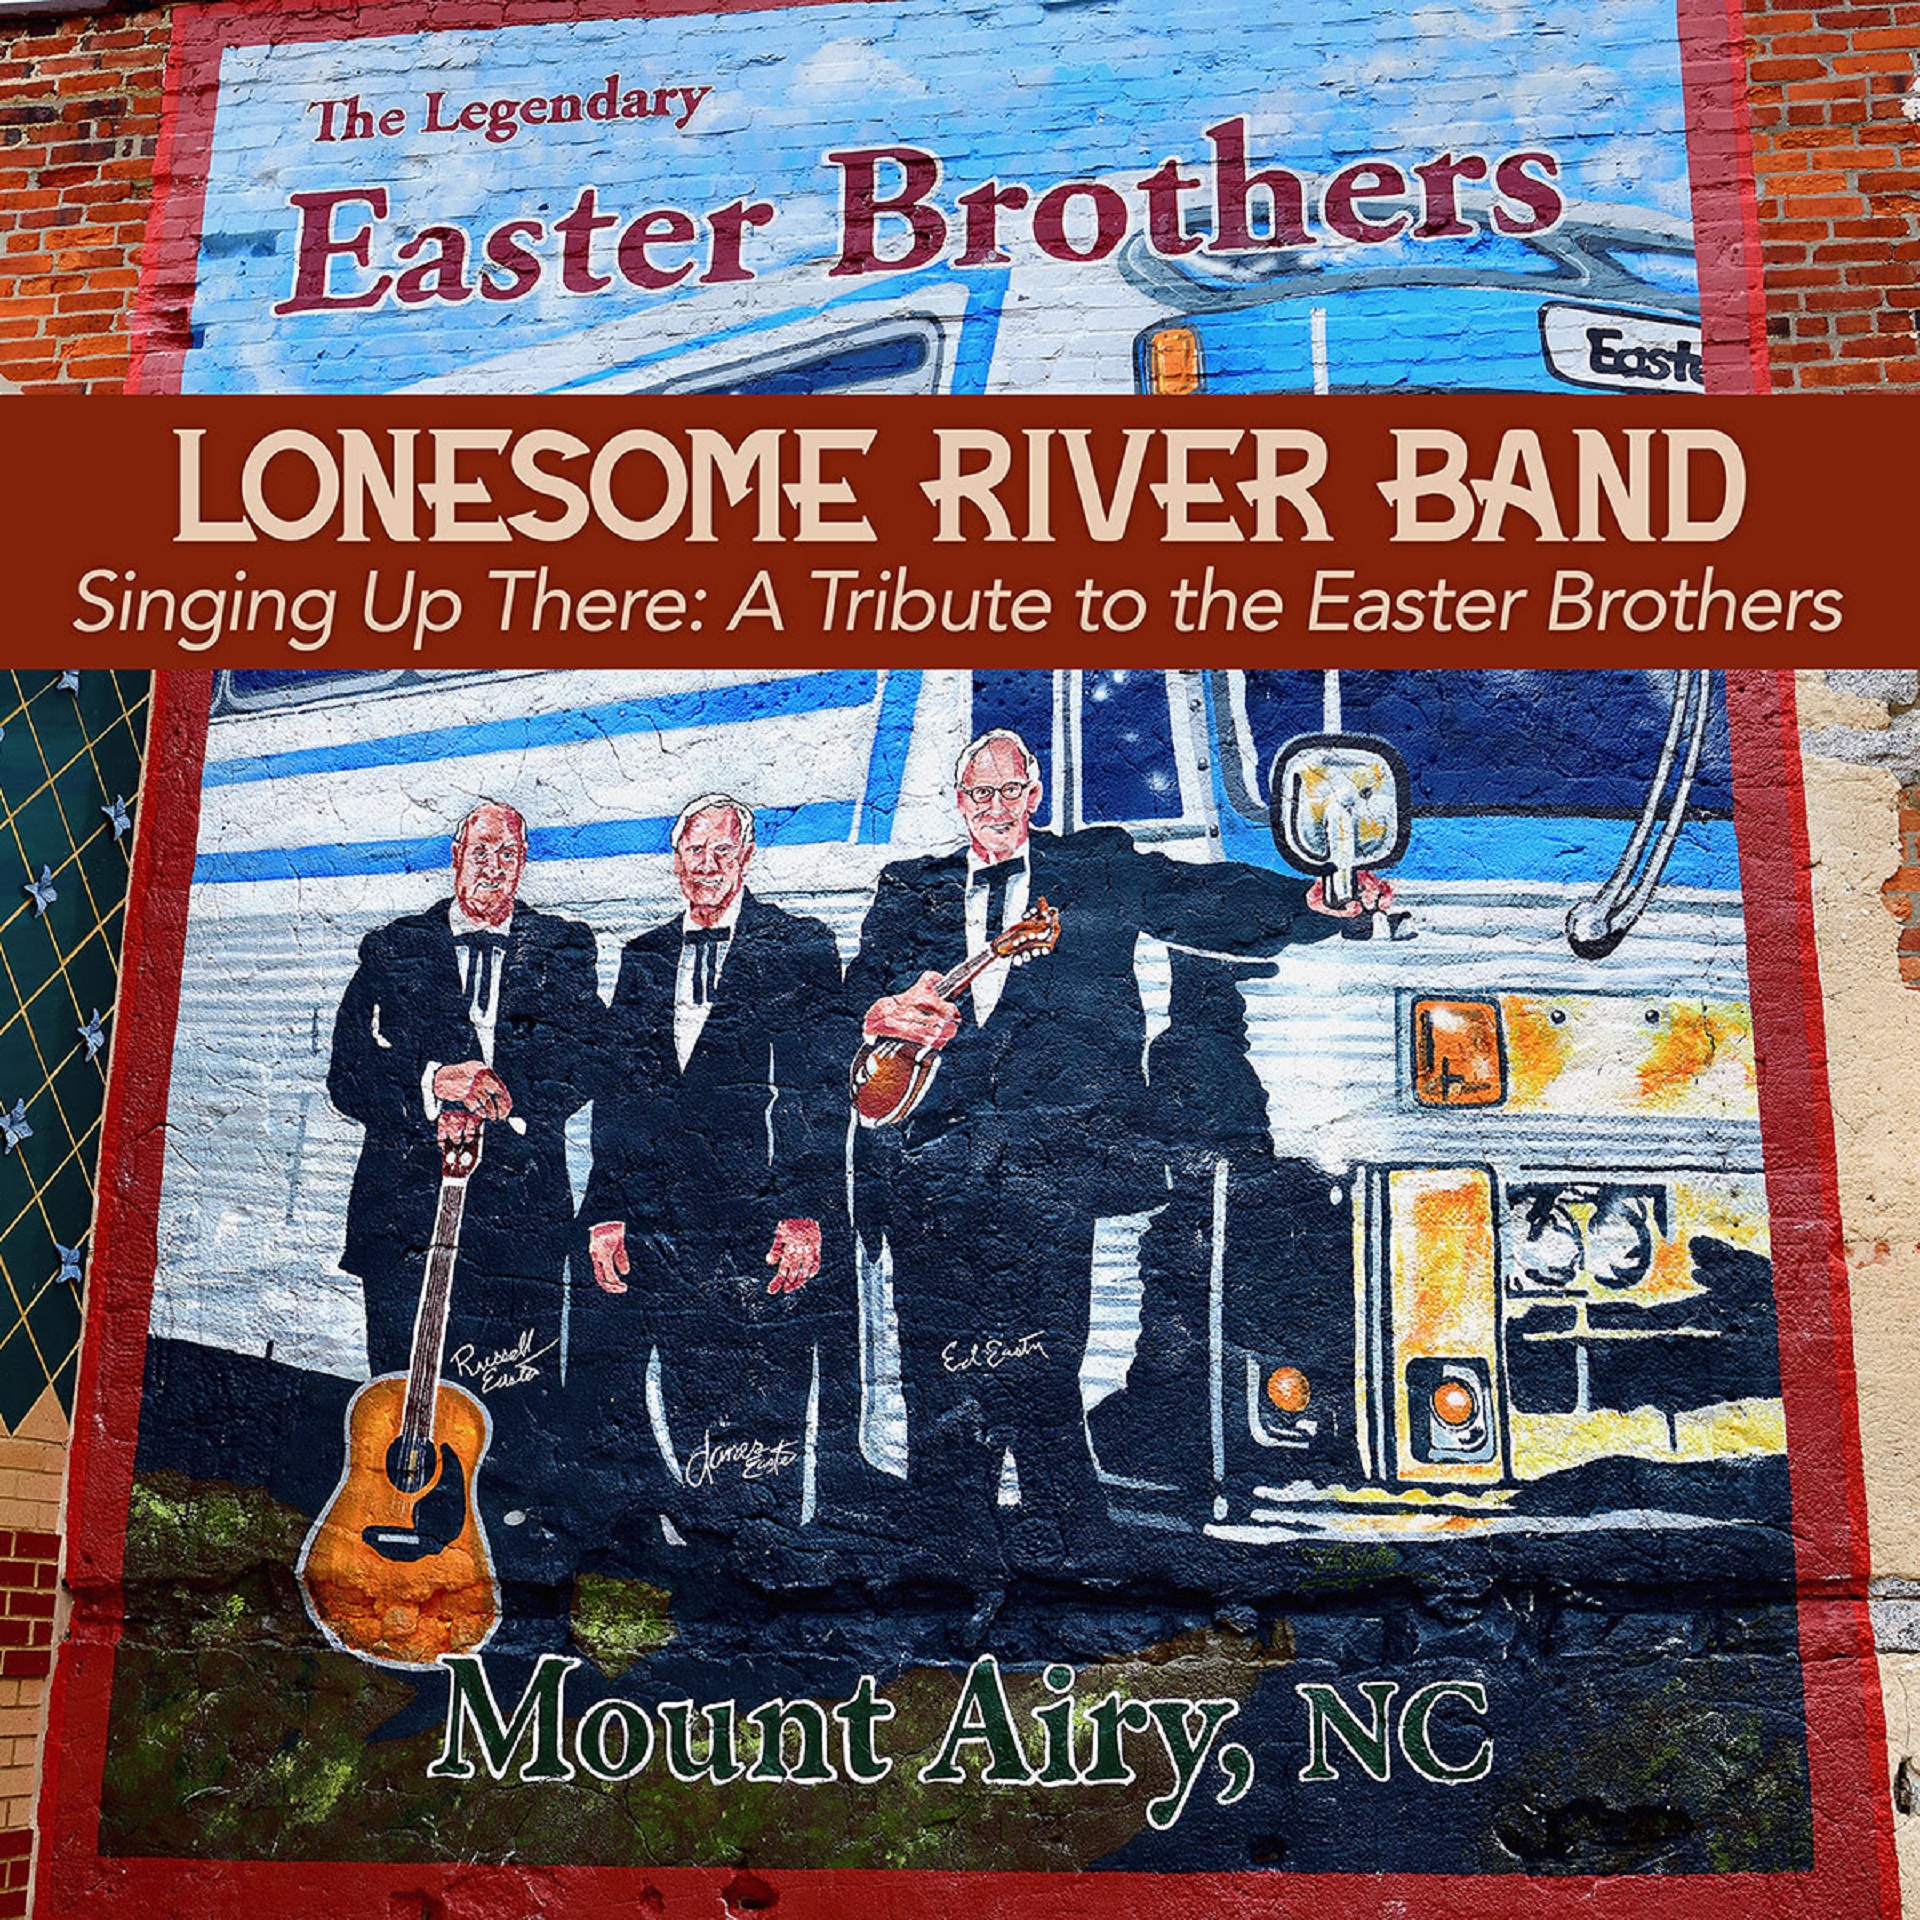 Lonesome River Band announces new album, Singing Up There: A Tribute to the Easter Brothers